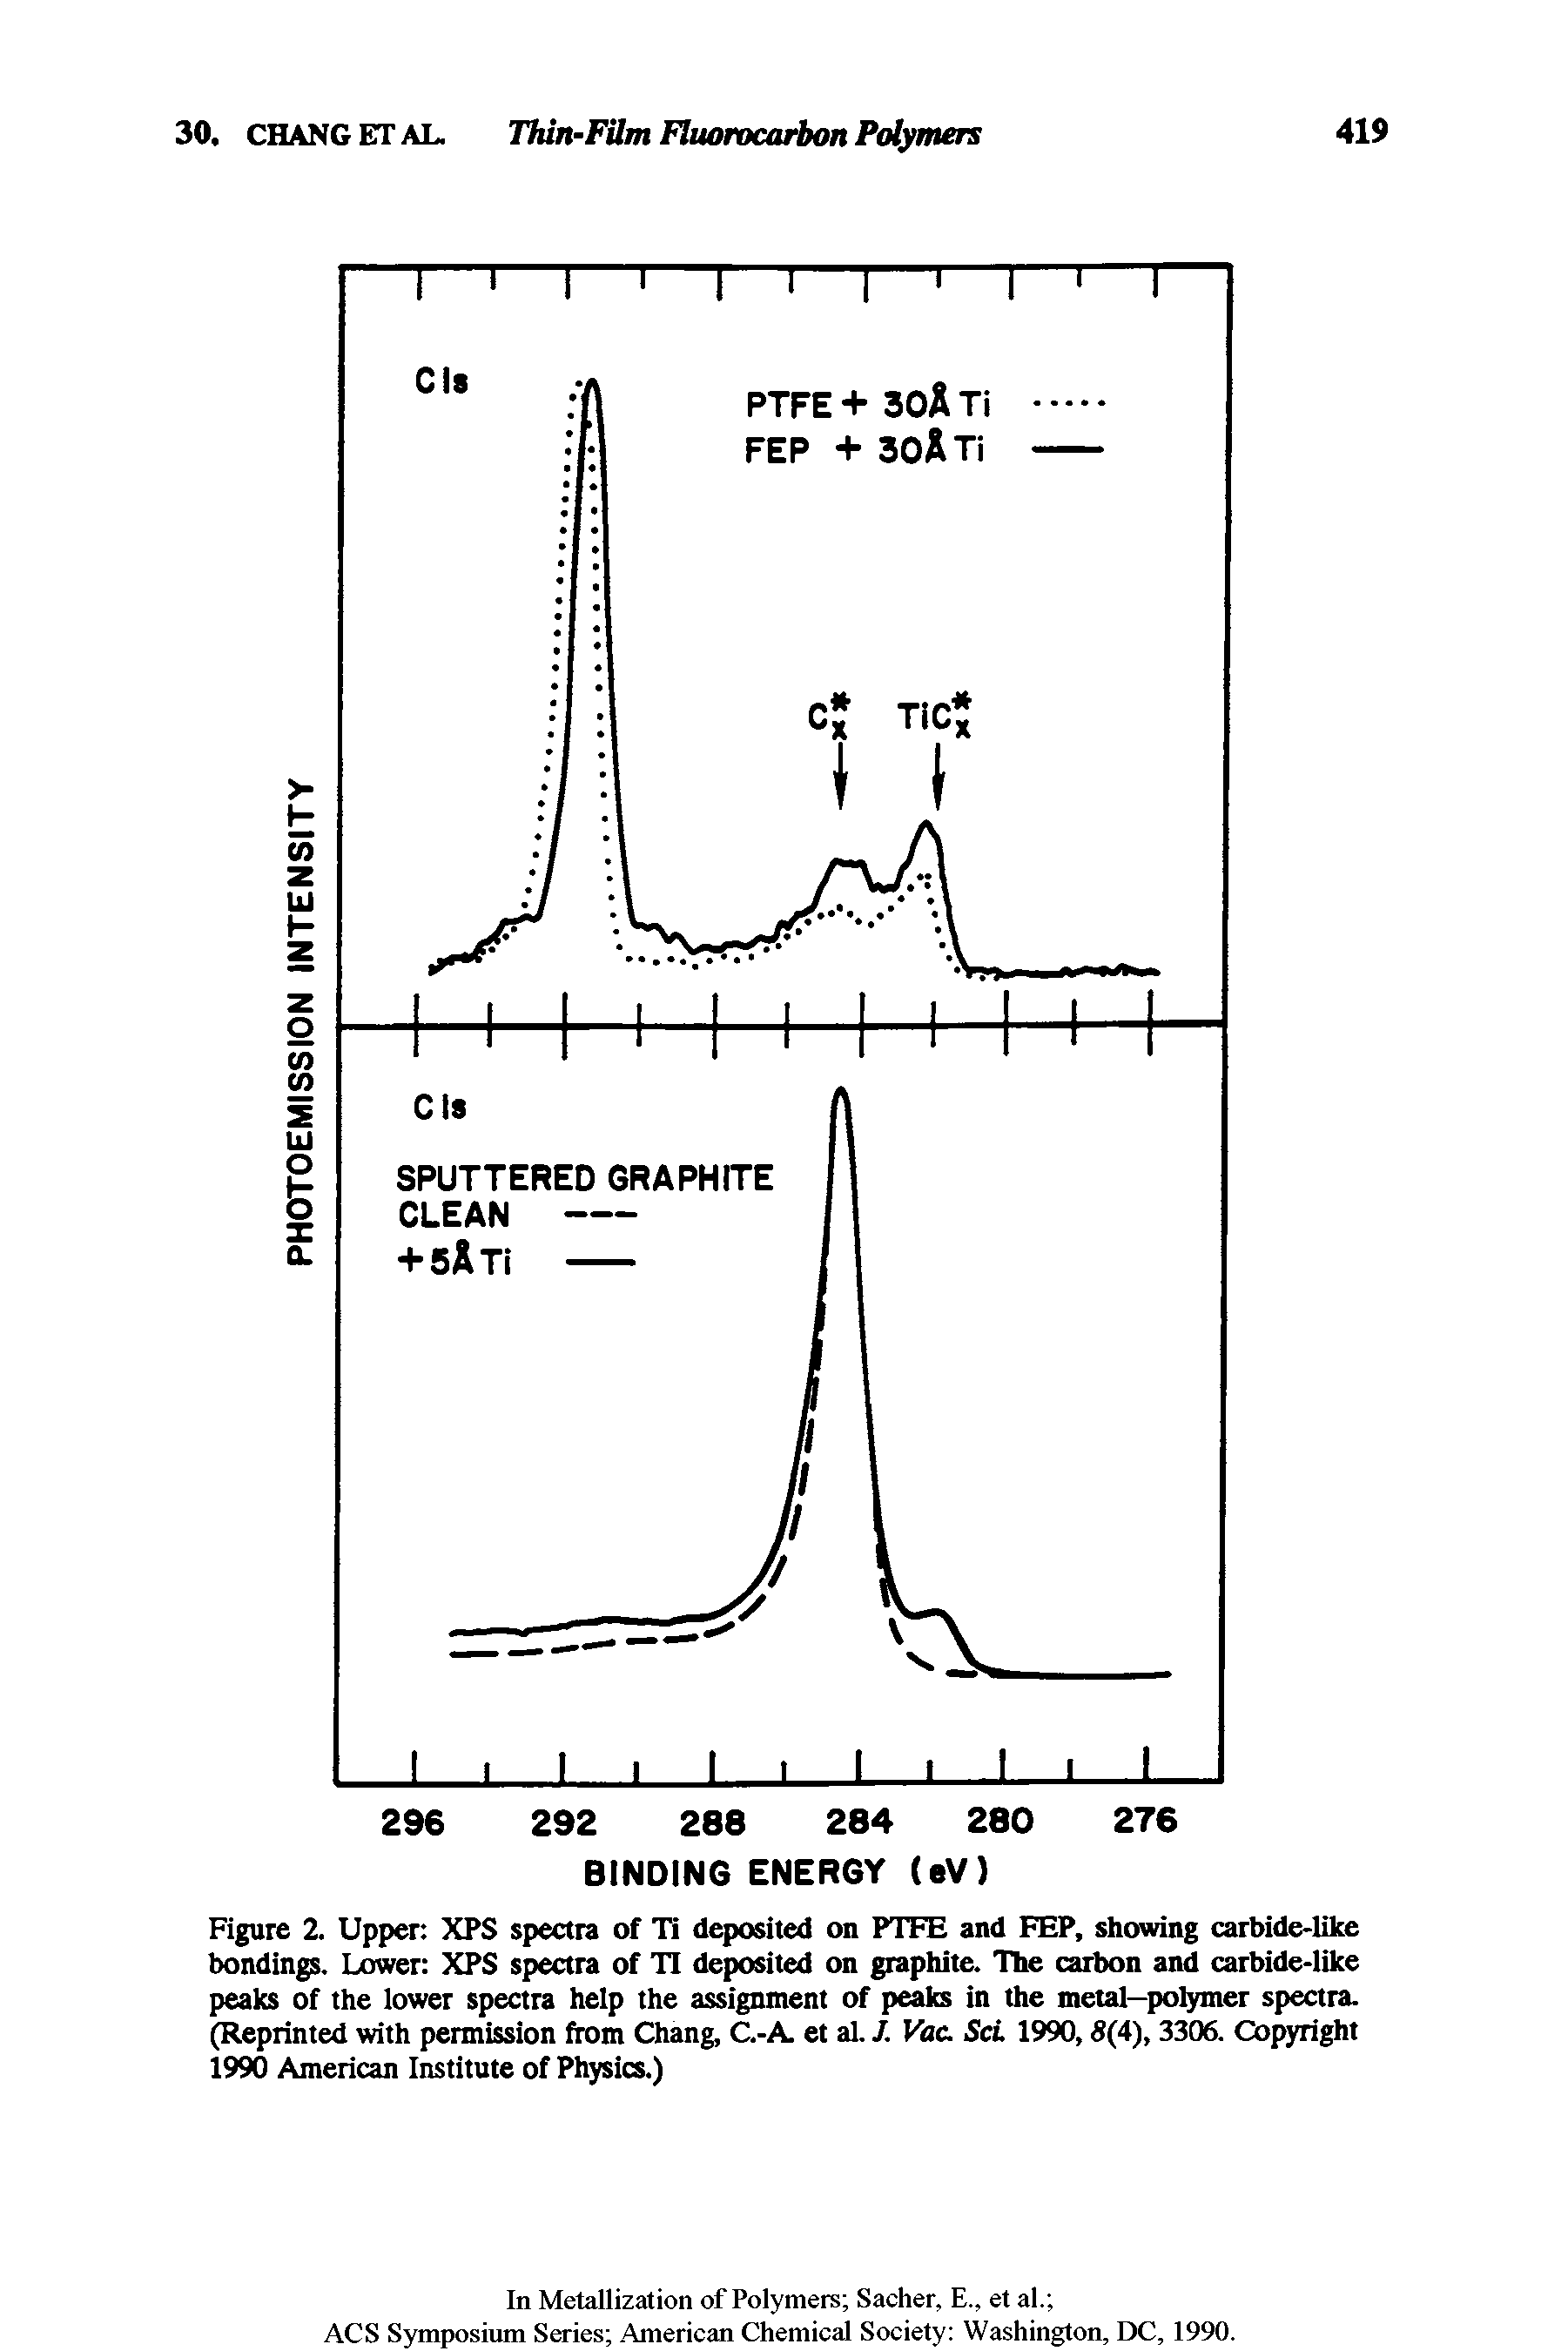 Figure 2. Upper XPS spectra of Ti deposited on PTFE and FEP, showing carbide-like bondings. Lower XPS spectra of TI deposited on graphite. The carbon and carbide-like peaks of the lower spectra help the assignment of peaks in the metal—polymer spectra. (Reprinted with permission from Chang, C.-A. et al. J. Vac. ScL 1990,5(4), 3306. Copyright 1990 American Institute of Physics.)...